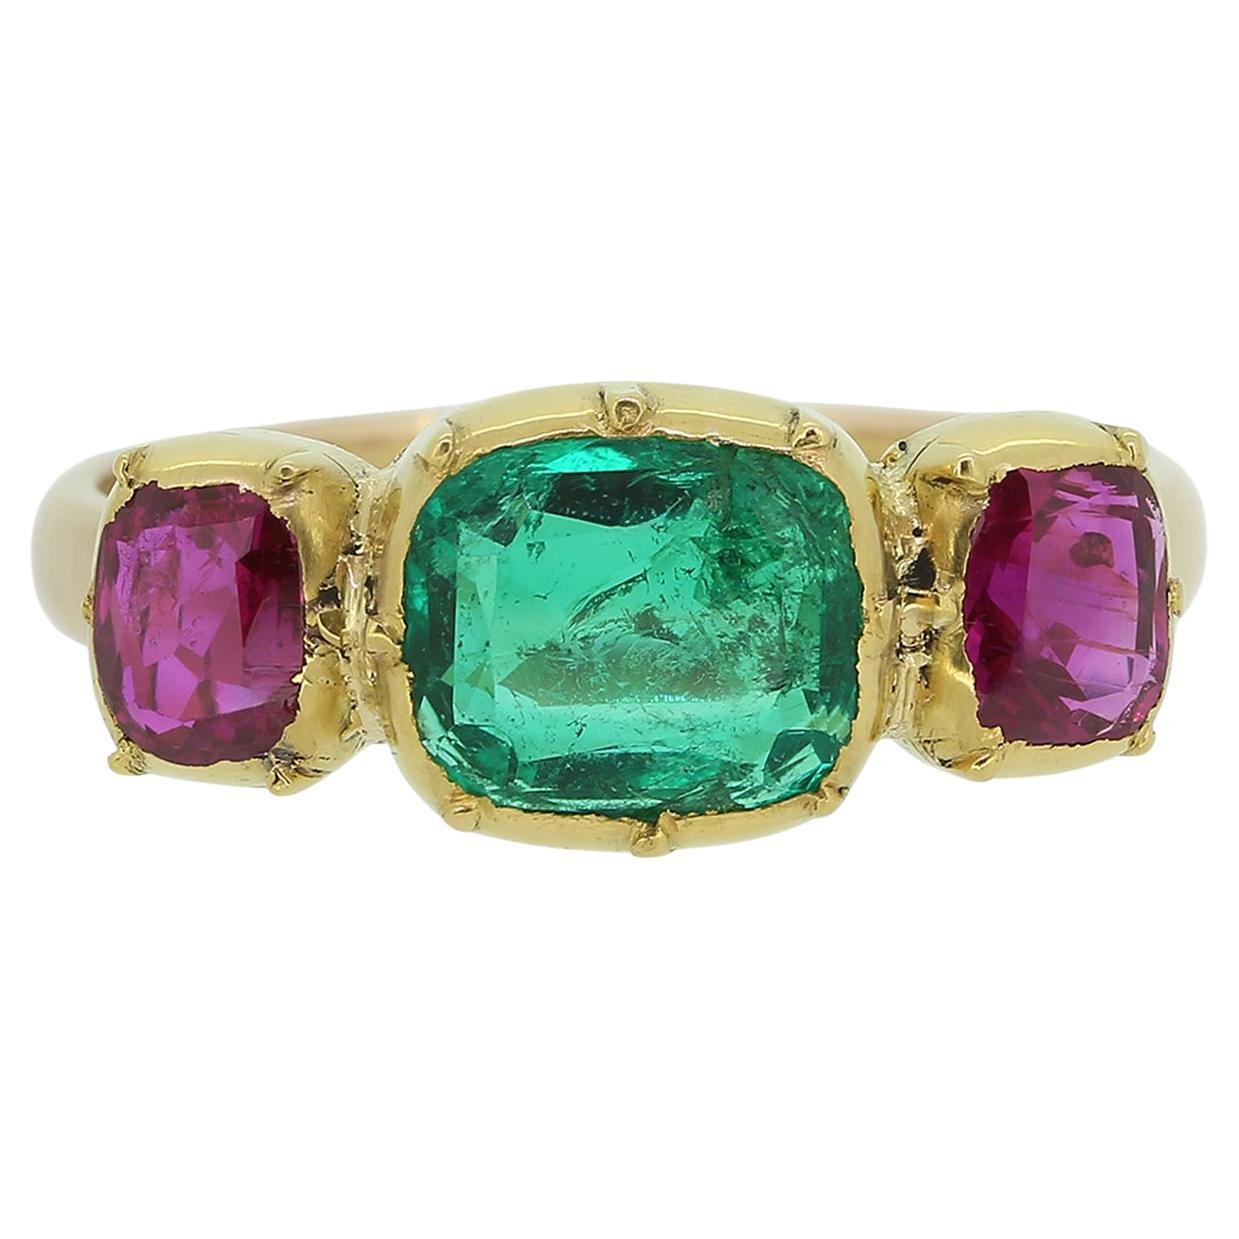 Vintage Emerald and Ruby Three-Stone Ring